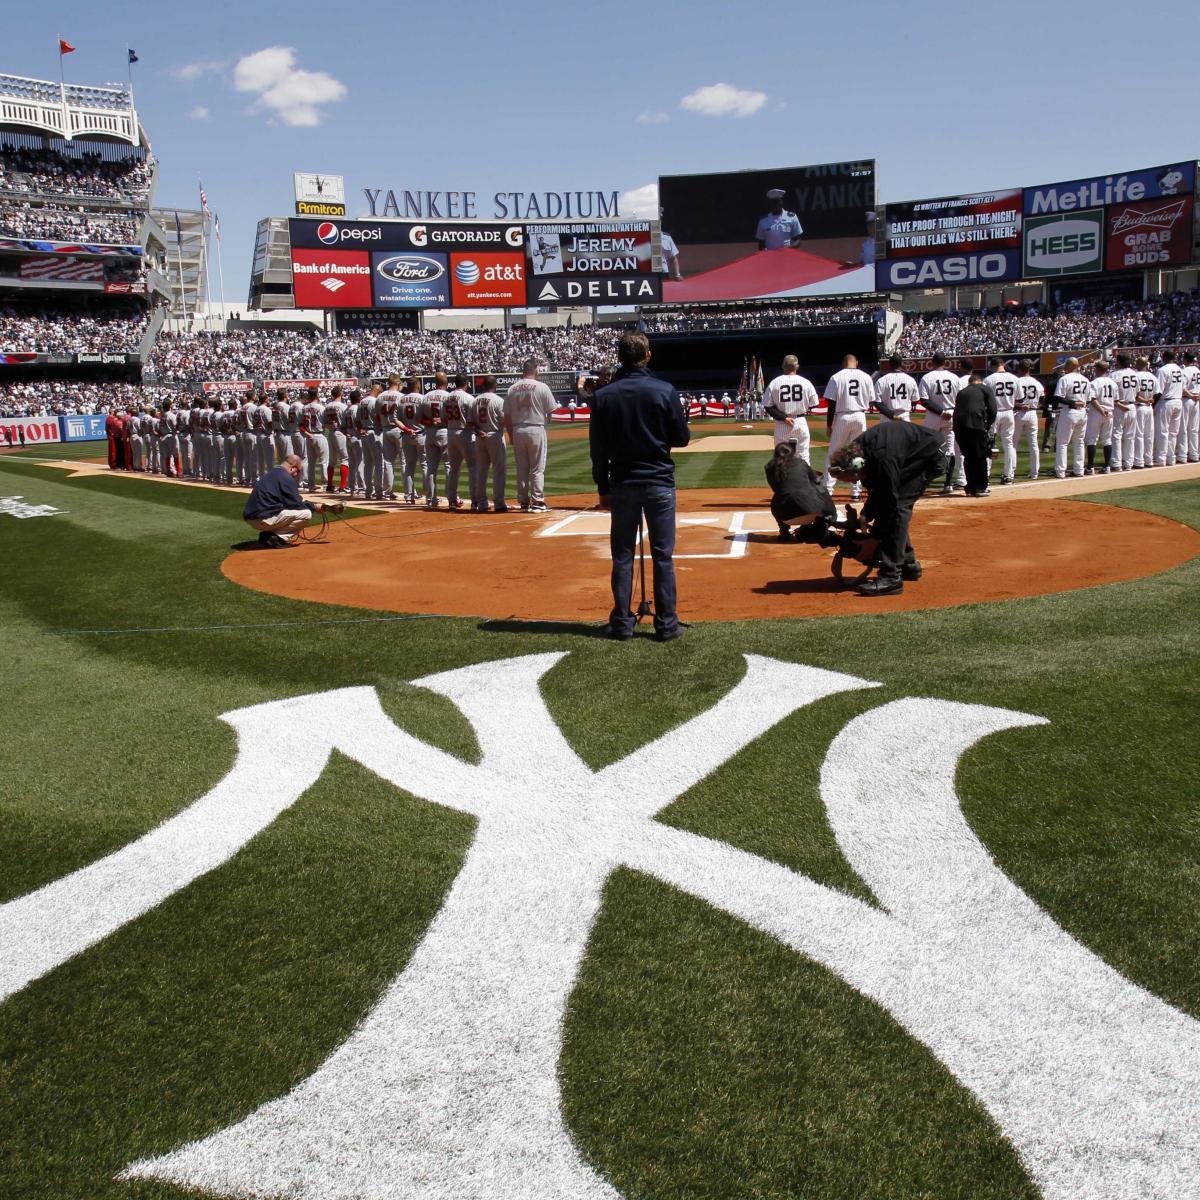 Playing in Bronx on 9/11 'incredibly meaningful' for Yankees